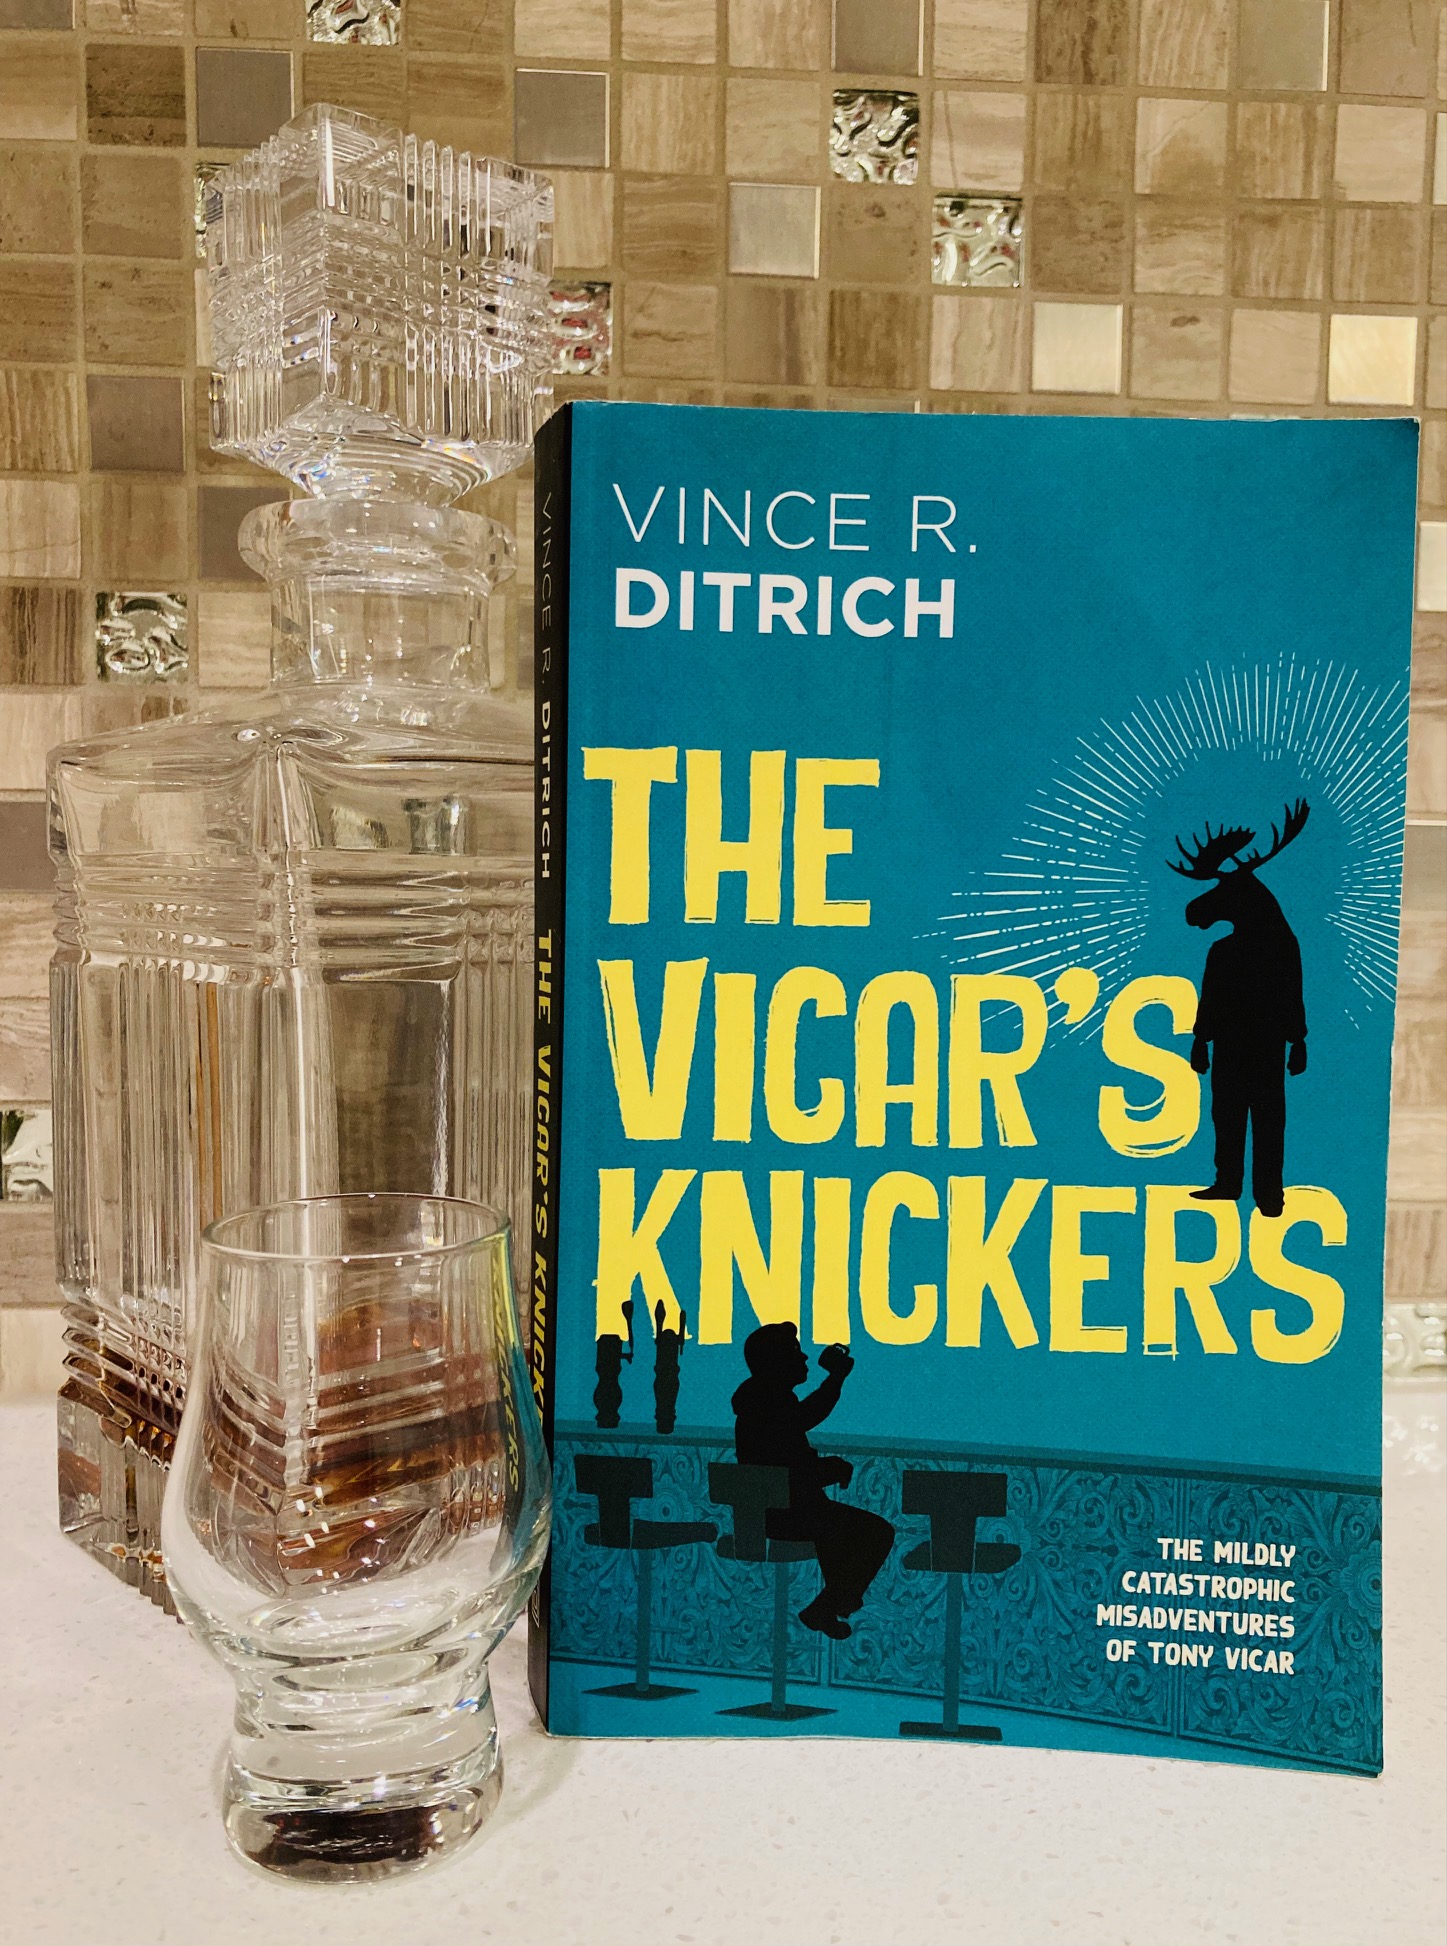 The Vicar's Knickers by Vince R. Ditrich book